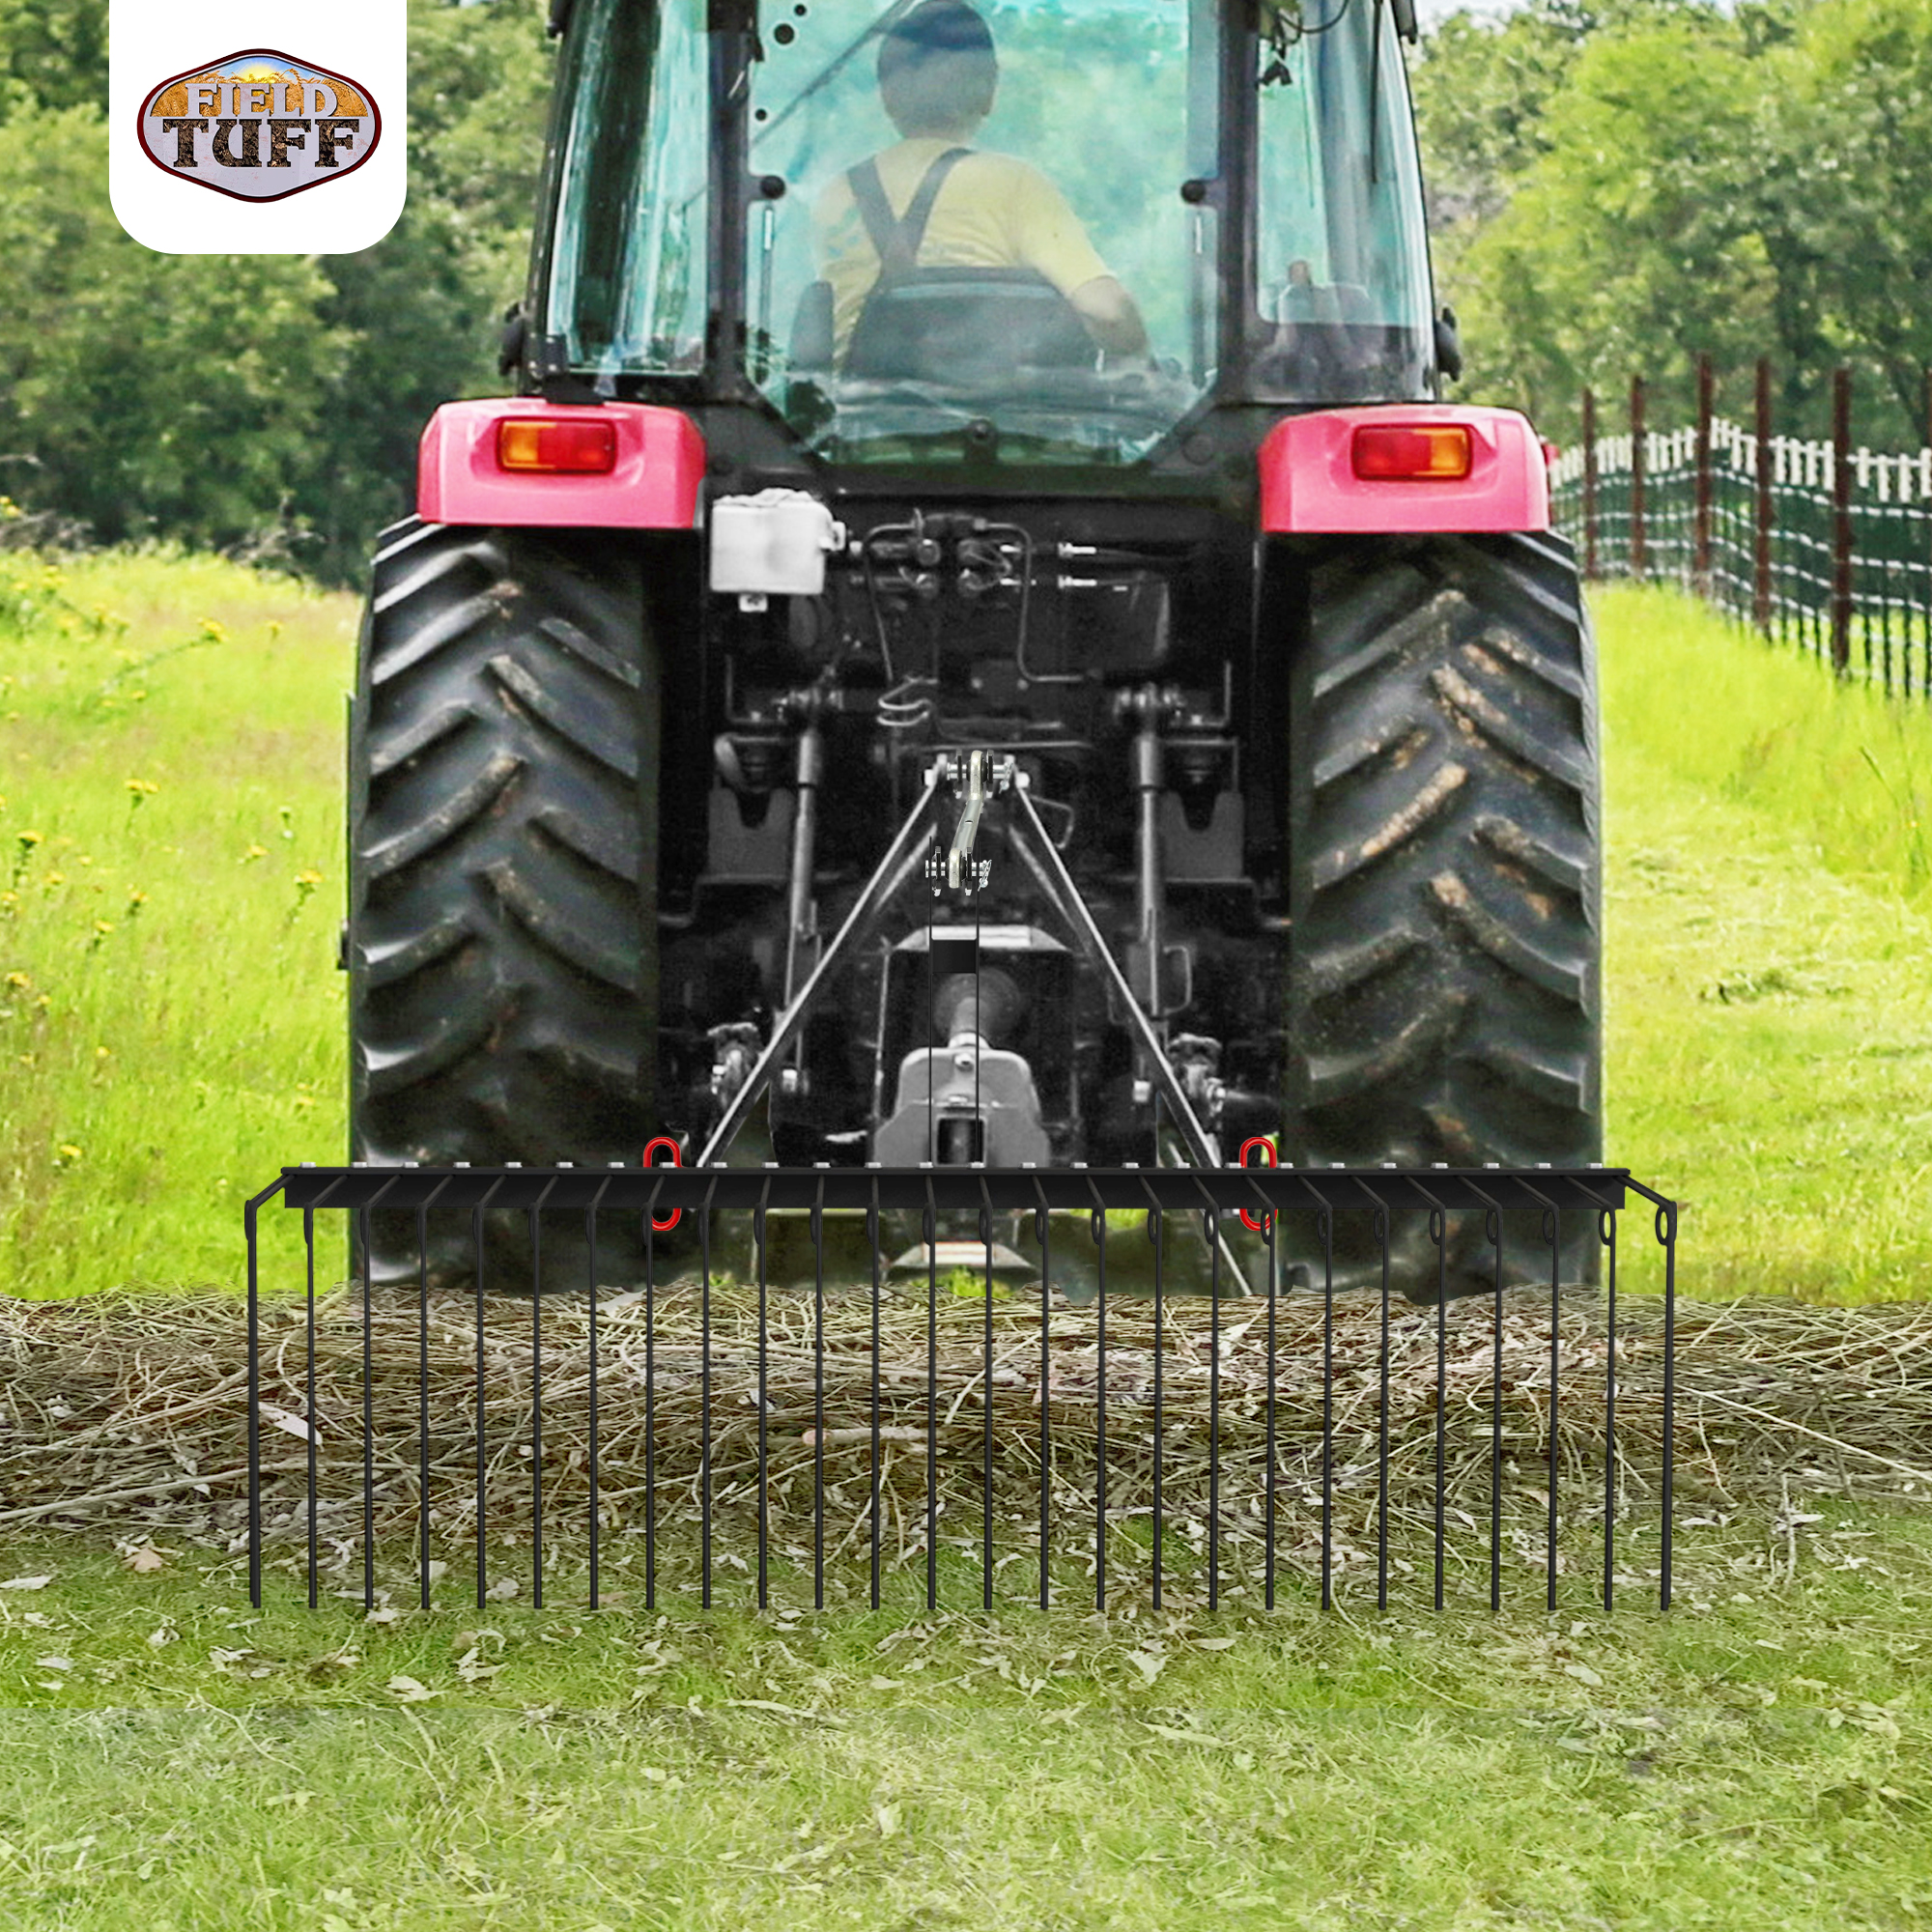 Field Tuff 60in Pine Straw Rake w/ Coil Spring Tines & 3 Point Hitch, Steel - image 5 of 9